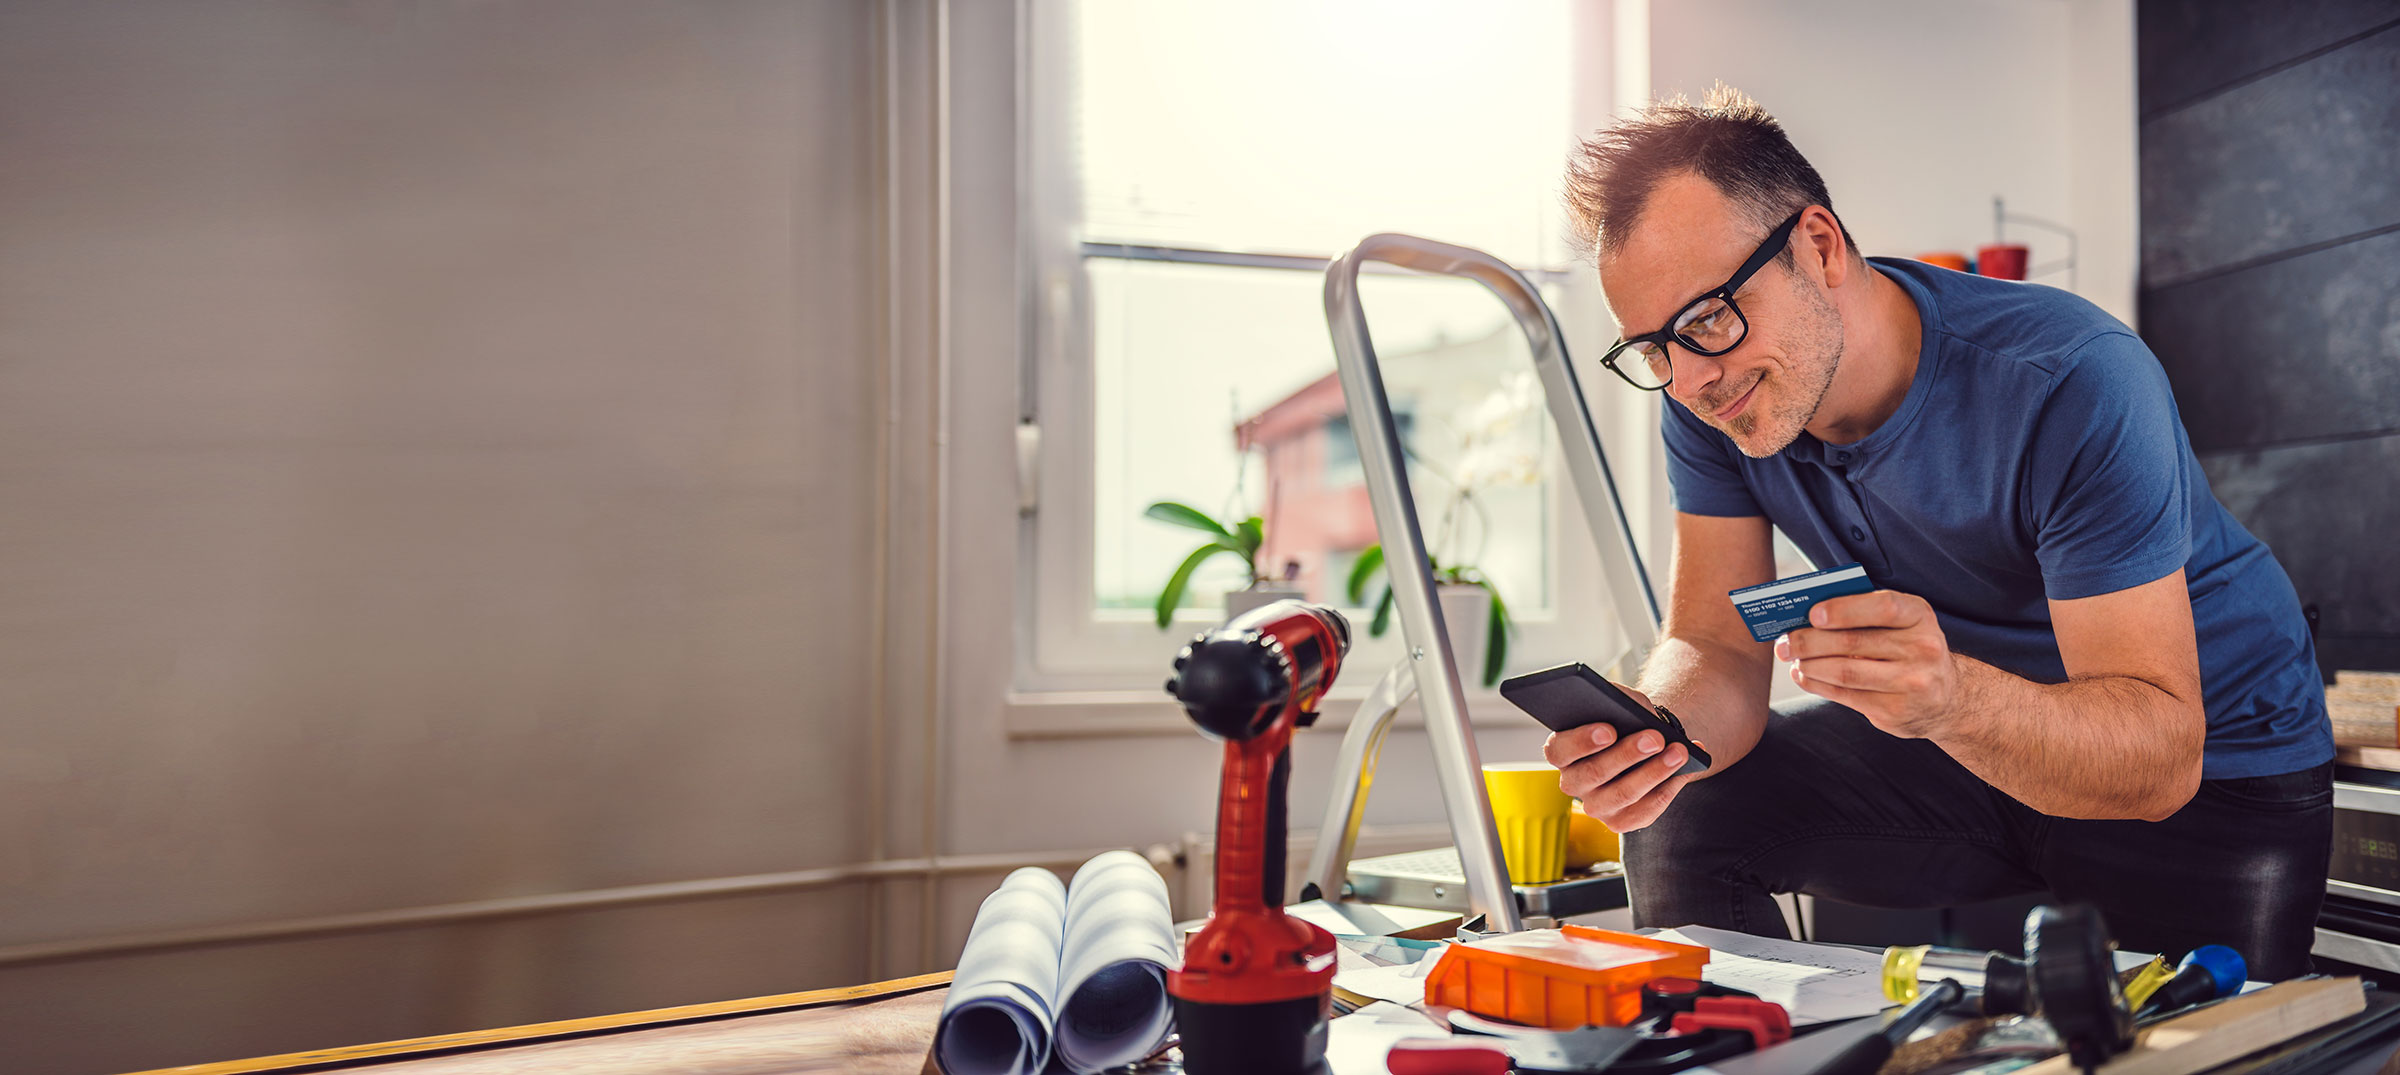 A man in glasses stands beside a ladder resting one foot on a rung. There’s a drill and other supplies on the table in front of him. His elbow rests on his knee while holding his mobile phone. In his other hand he holds a bank card. He smiles while looking at his phone.